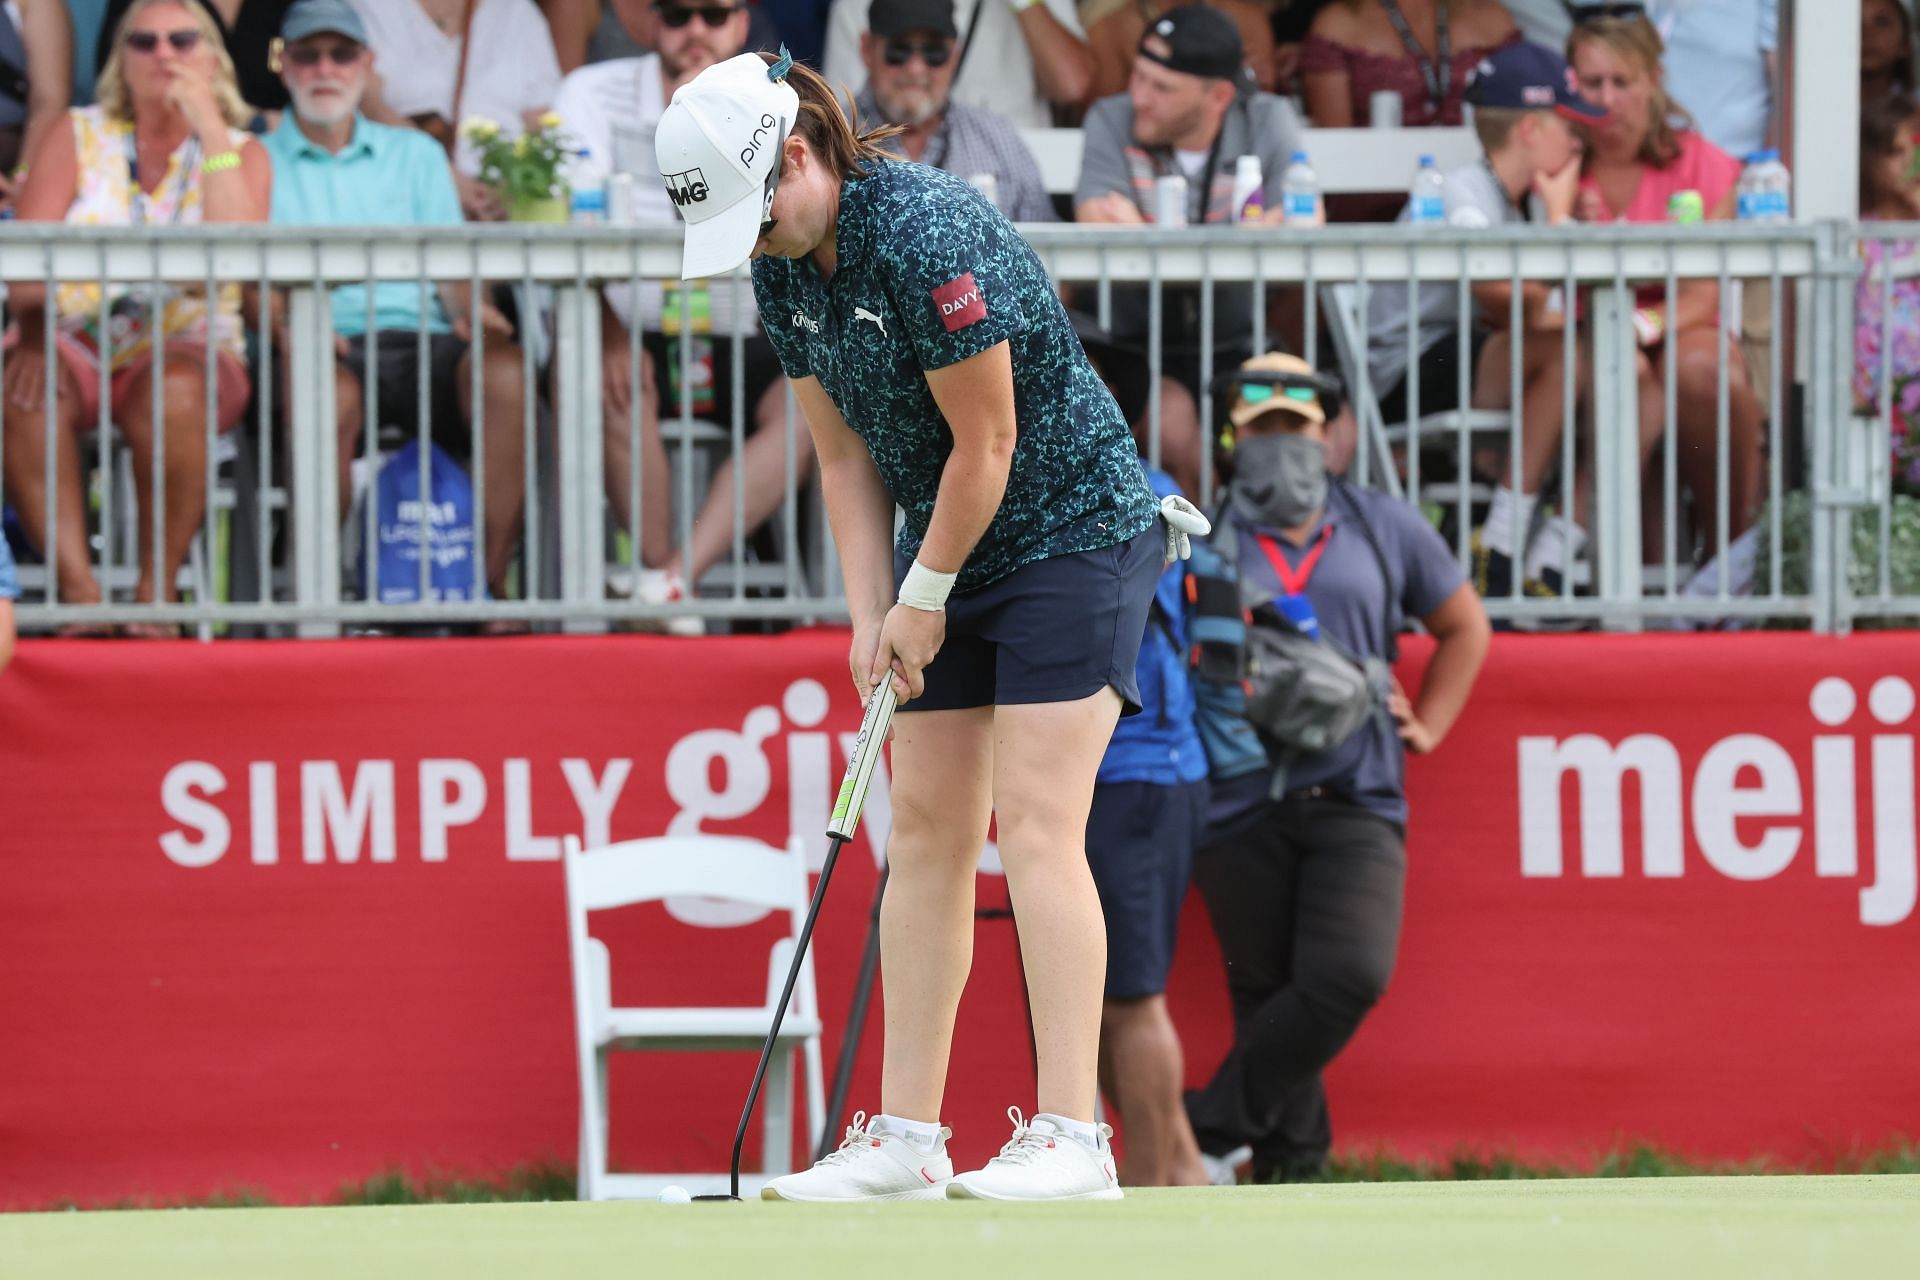 Meijer LPGA Classic for Simply Give - Final Round